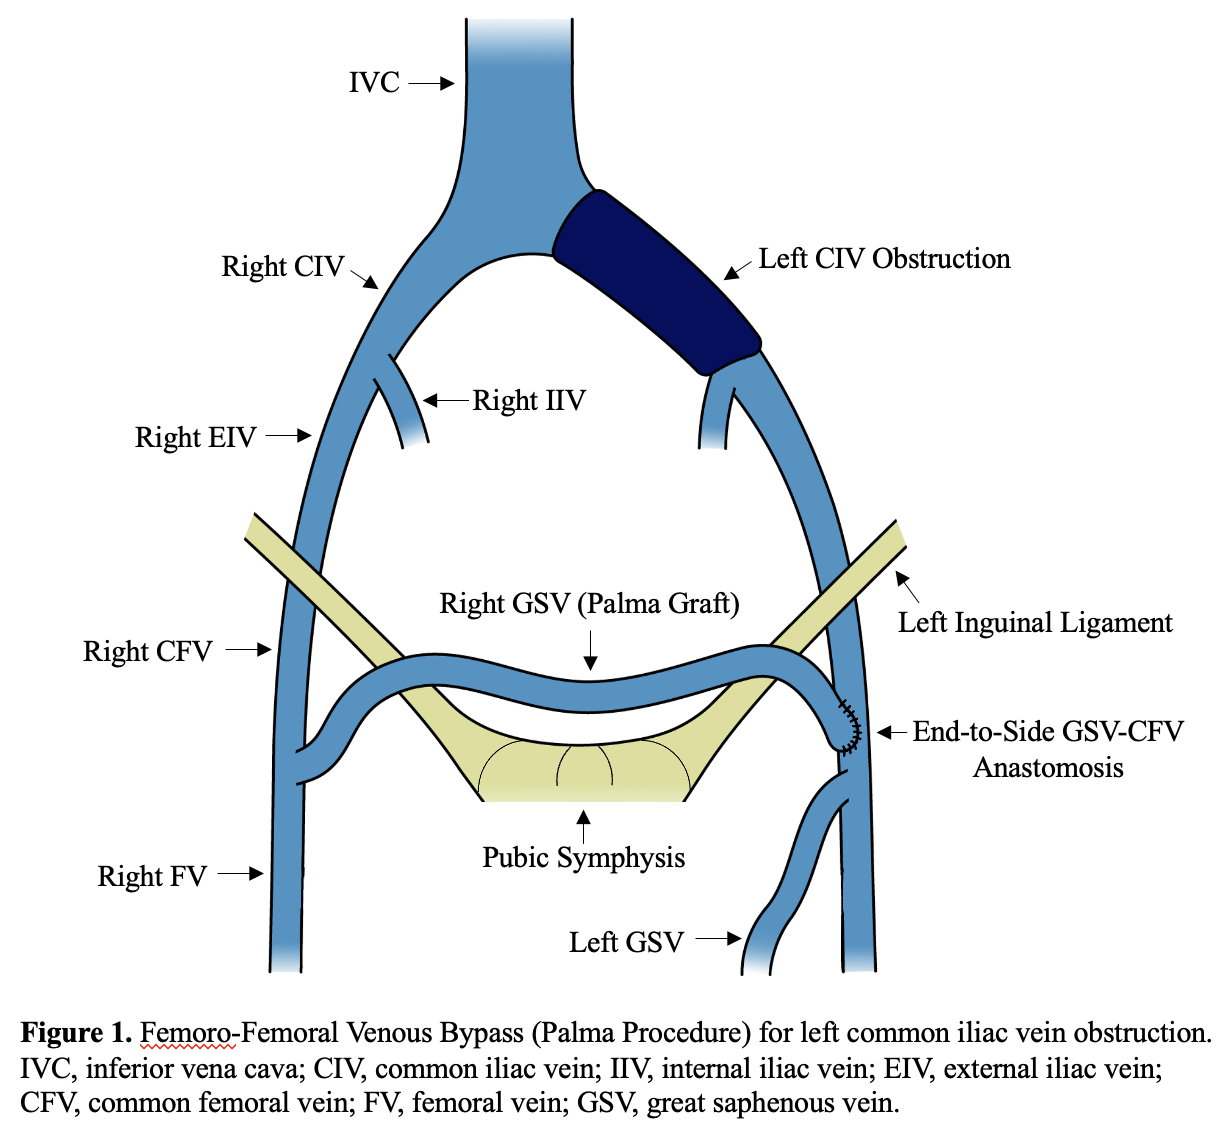 Femoro-femoral Venous Bypass. Also known as the Palma procedure.